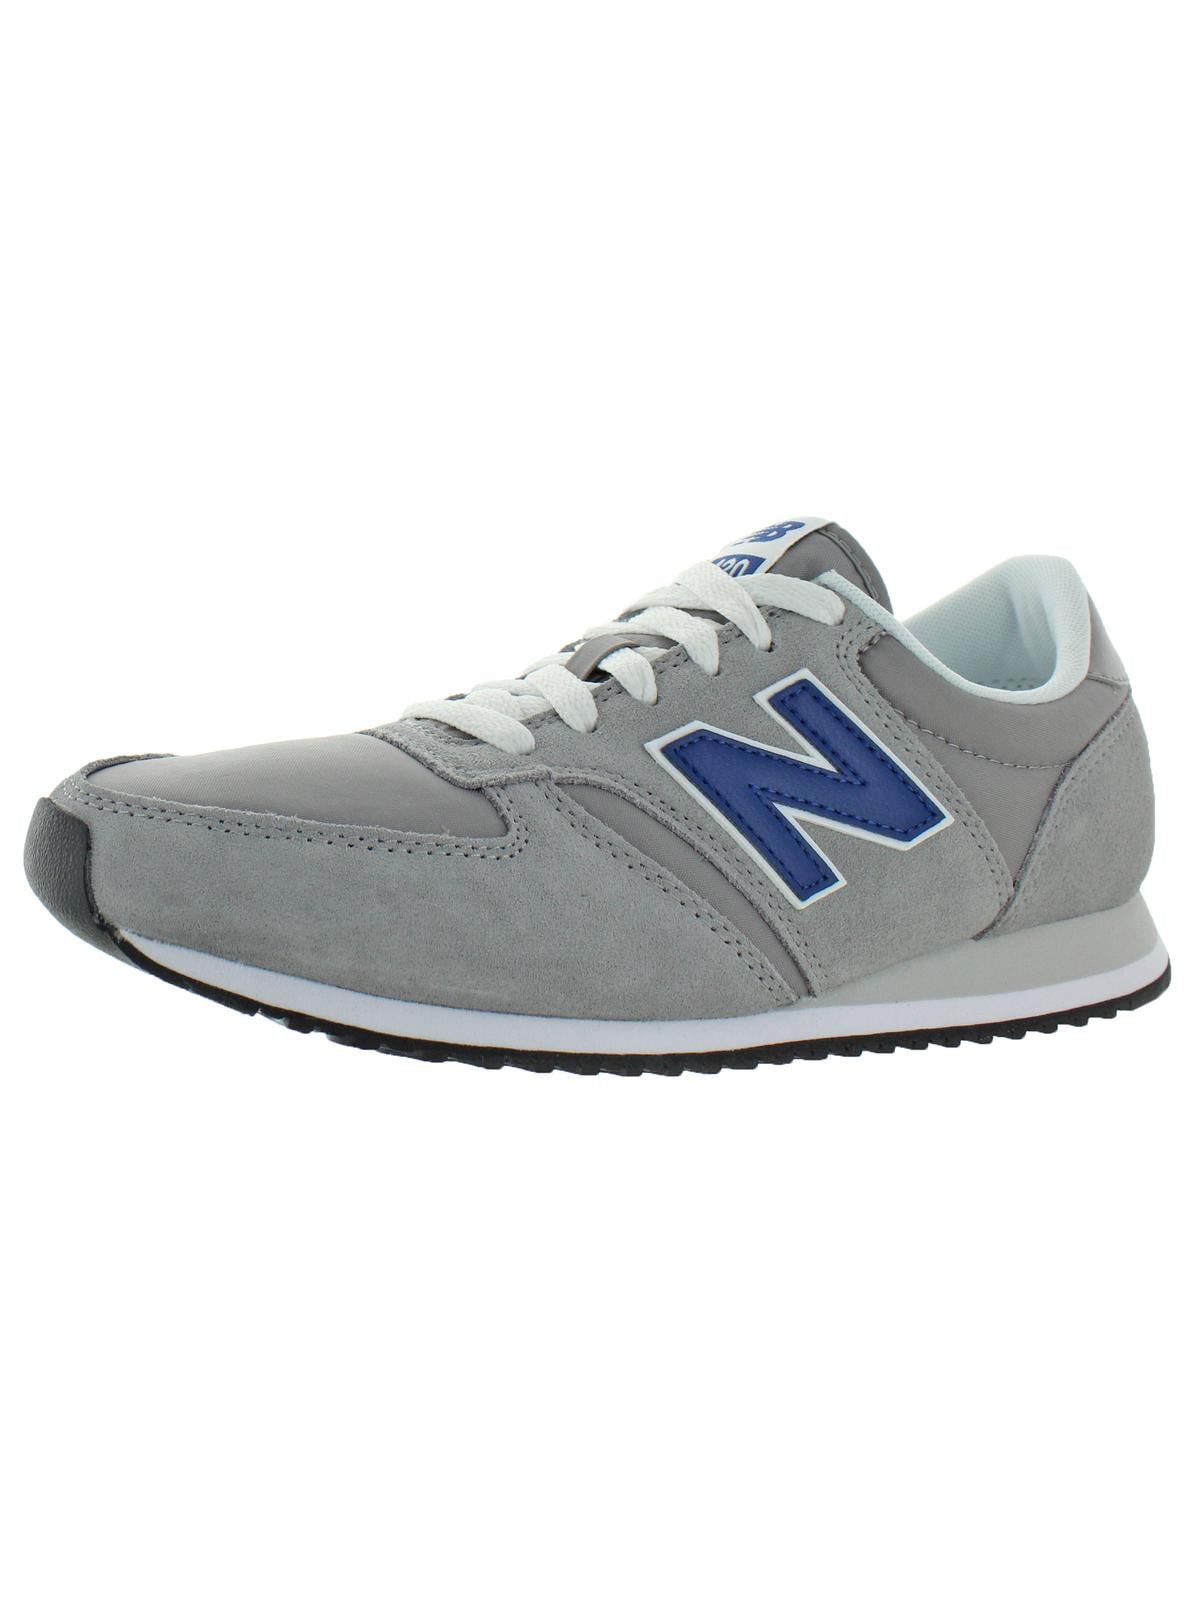 New Balance Mens Classic 420 Suede 